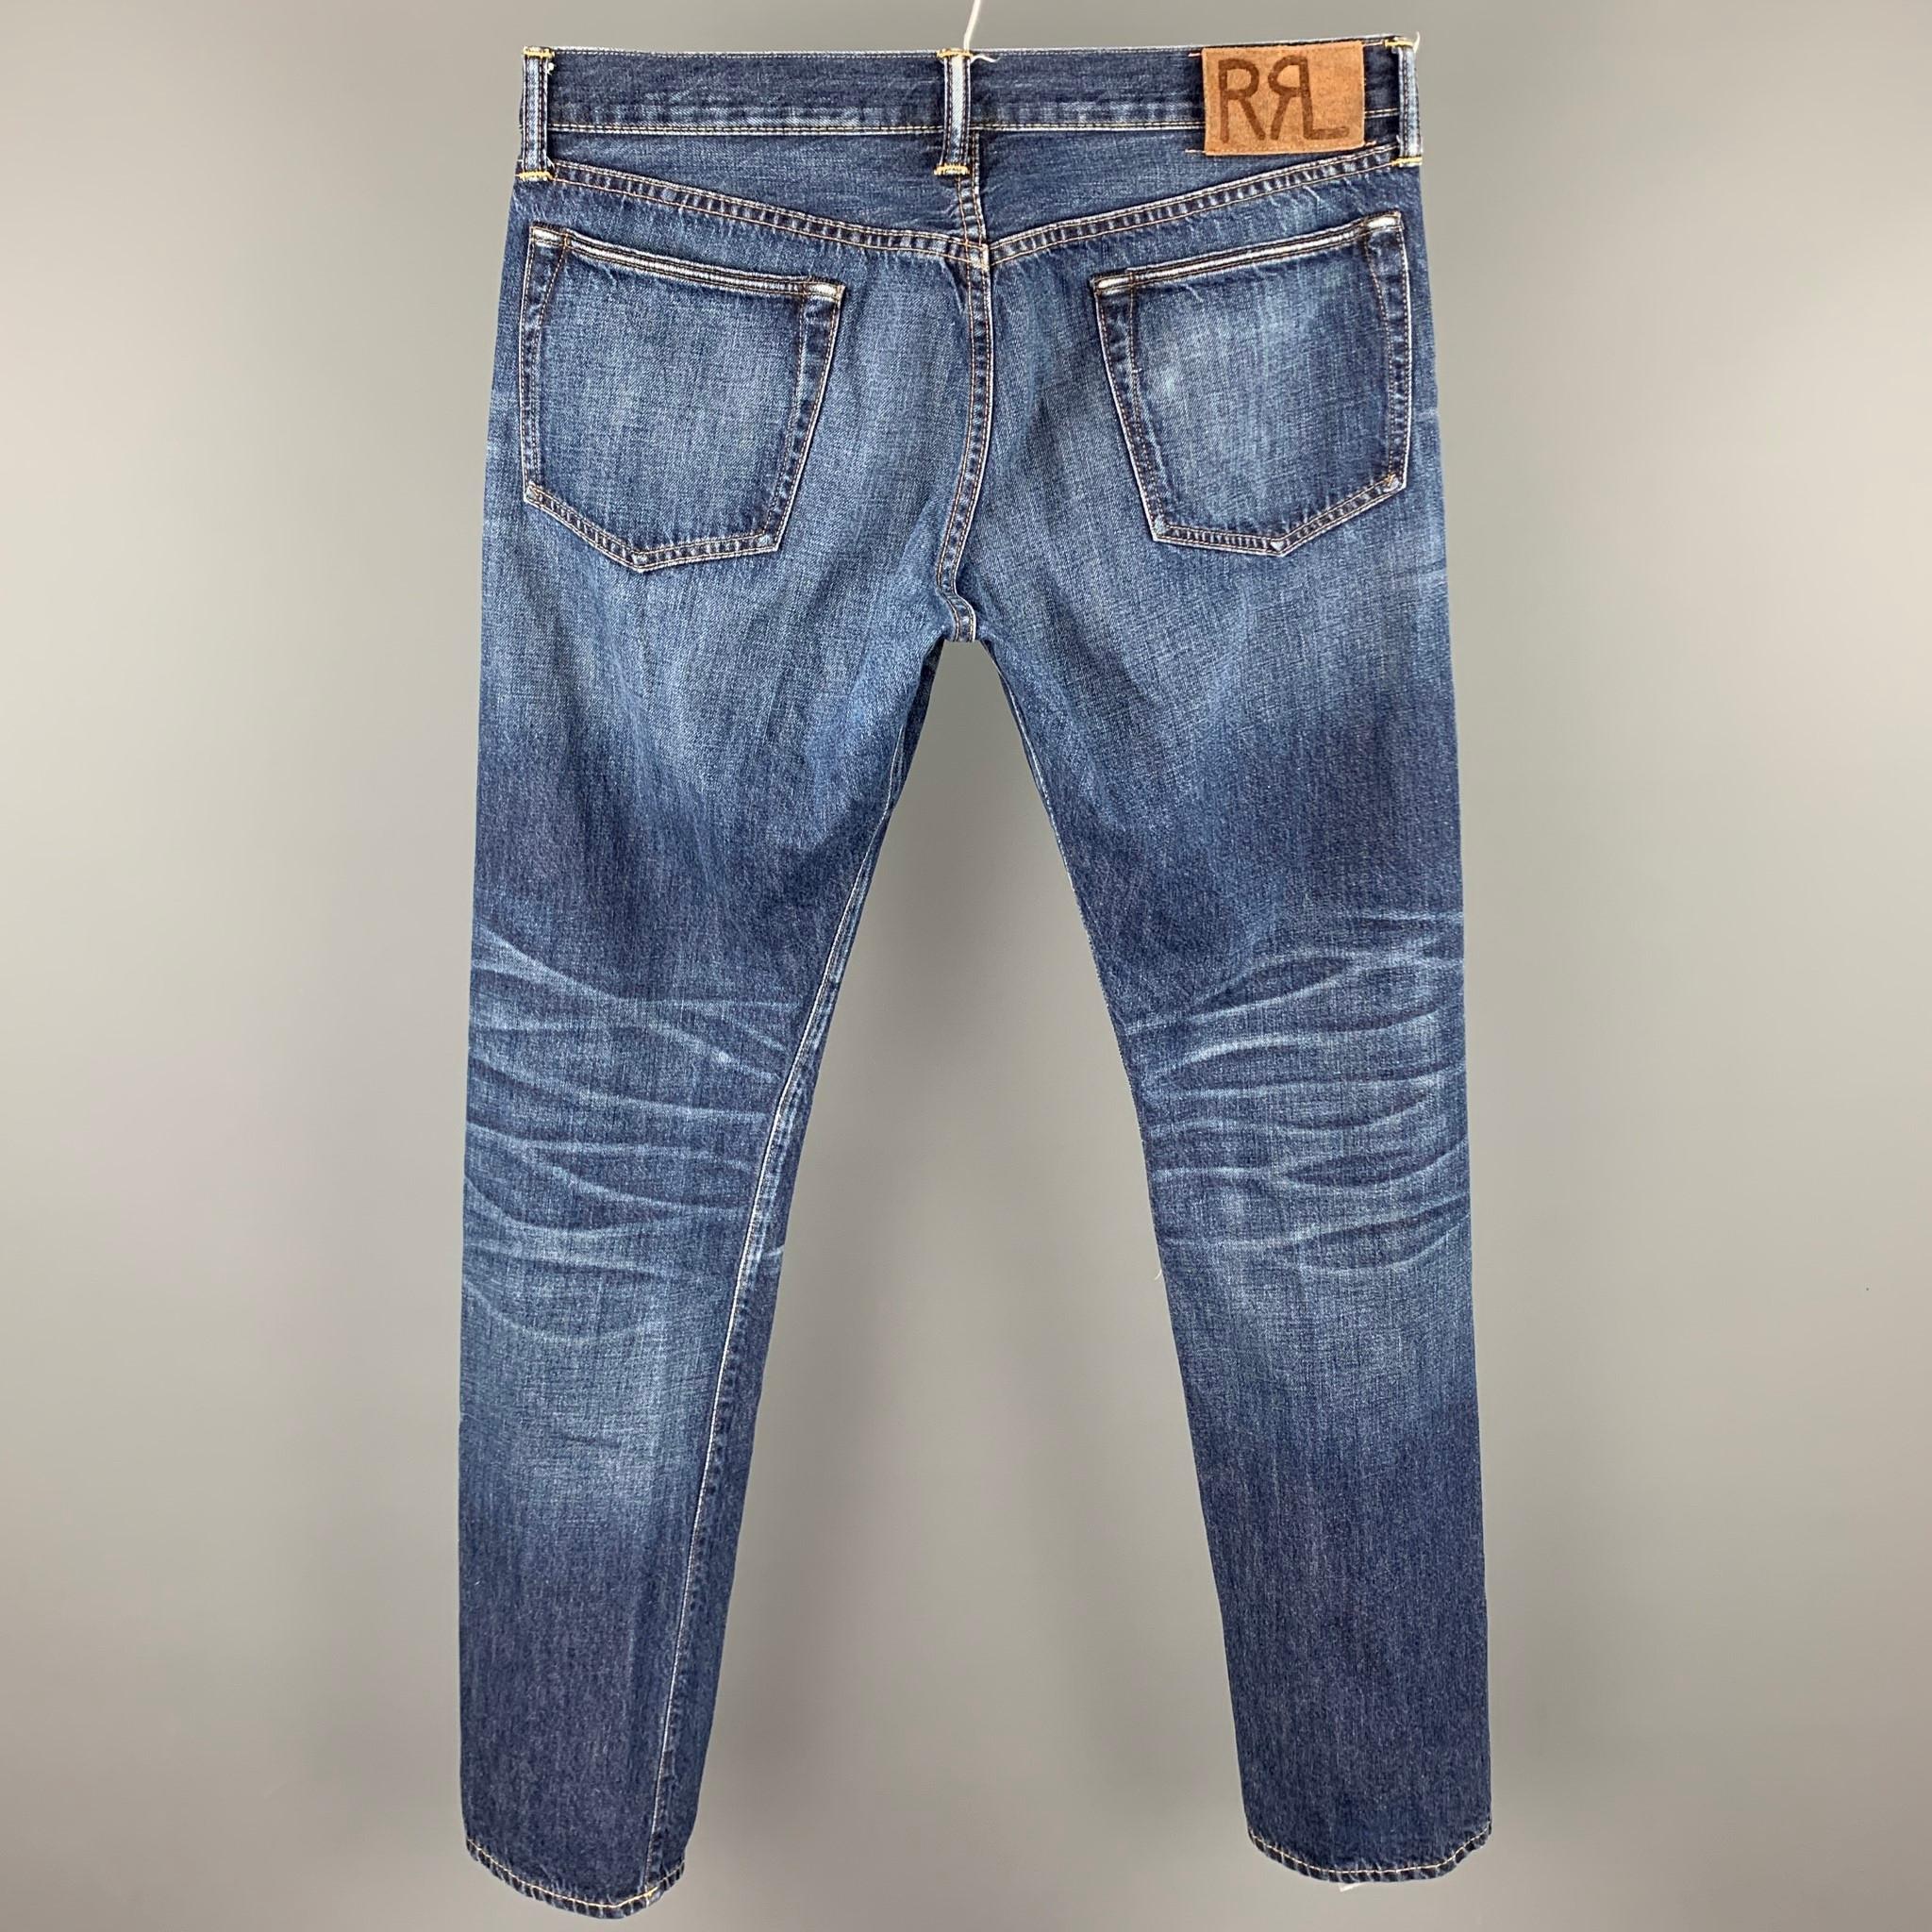 RRL by RALPH LAUREN jeans comes in a indigo washed selvedge denim featuring a slim fit, contrast stitching, and a button fly closure. Made in USA.

Good Pre-Owned Condition.
Marked: 33x32

Measurements:

Waist: 34 in.
Rise: 10 in.
Inseam: 33 in. 